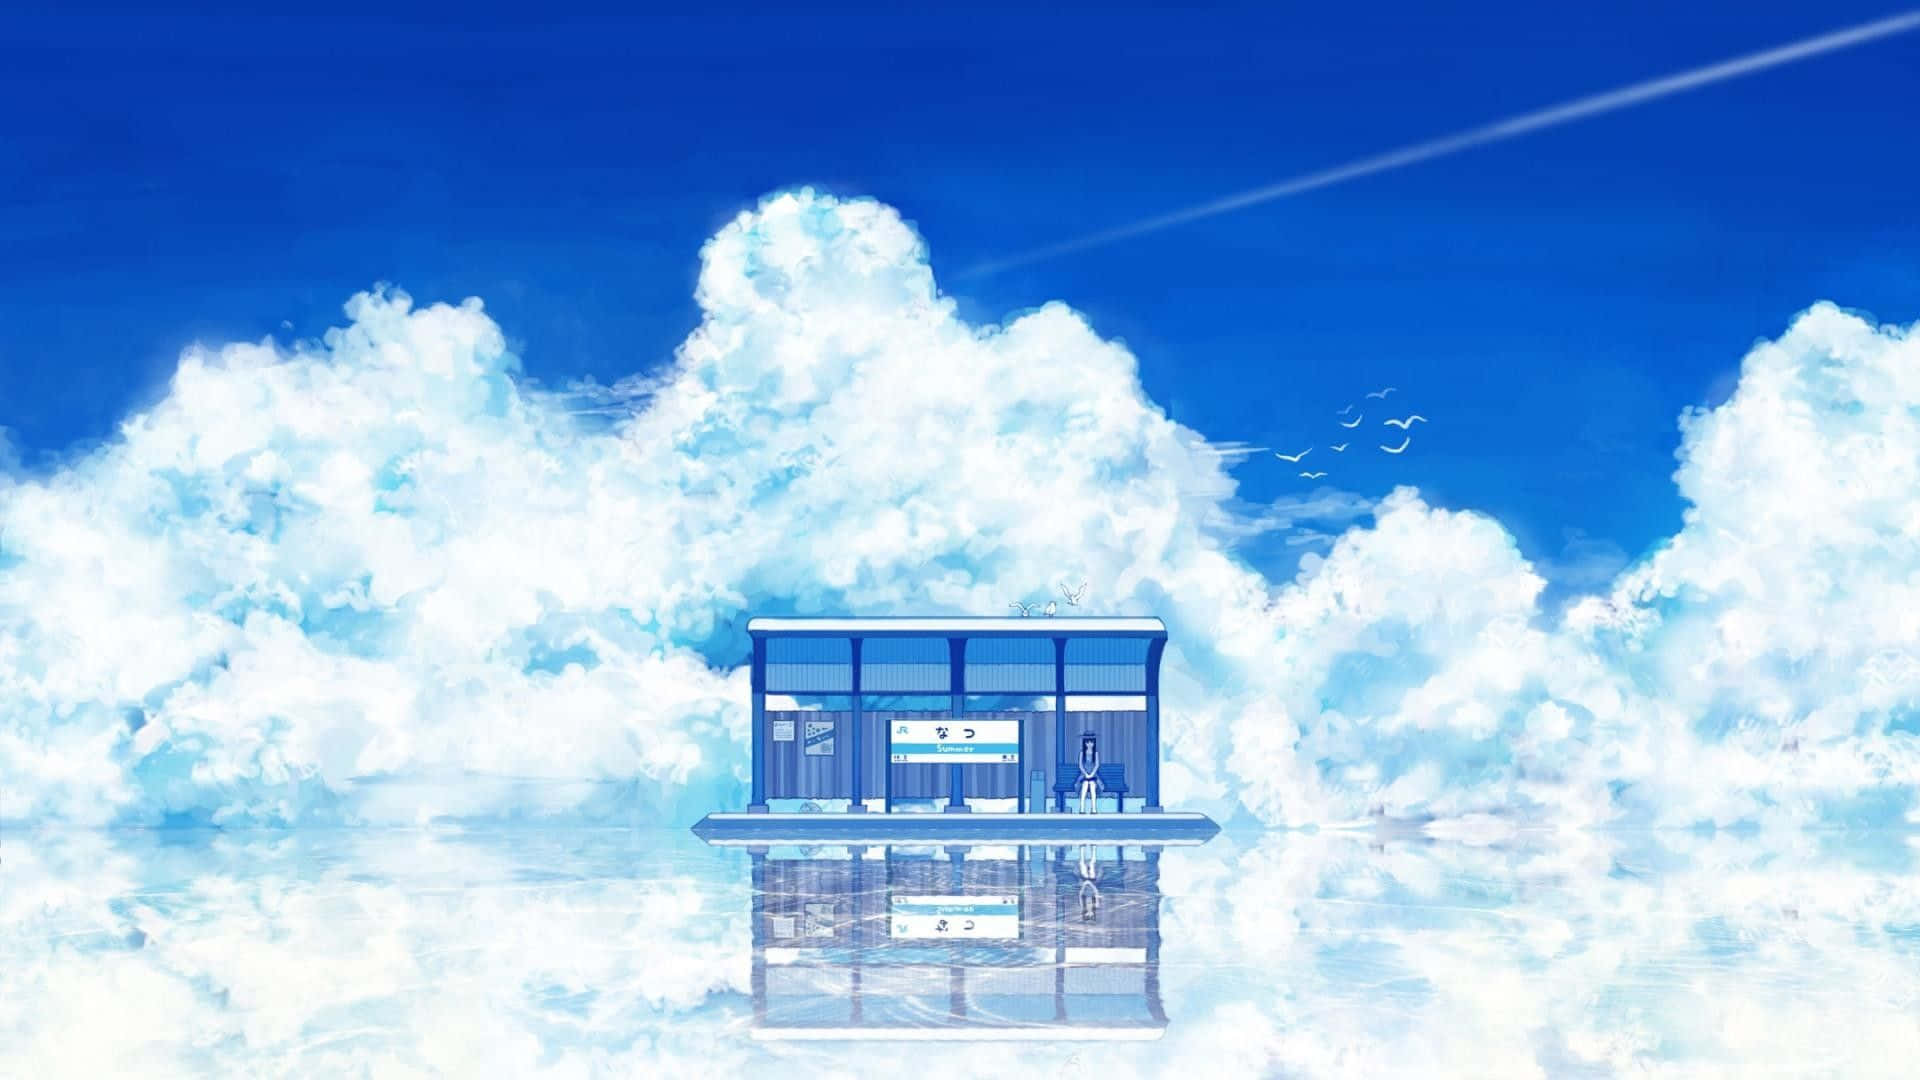 Blue Anime Scenic Sky With Clouds Background